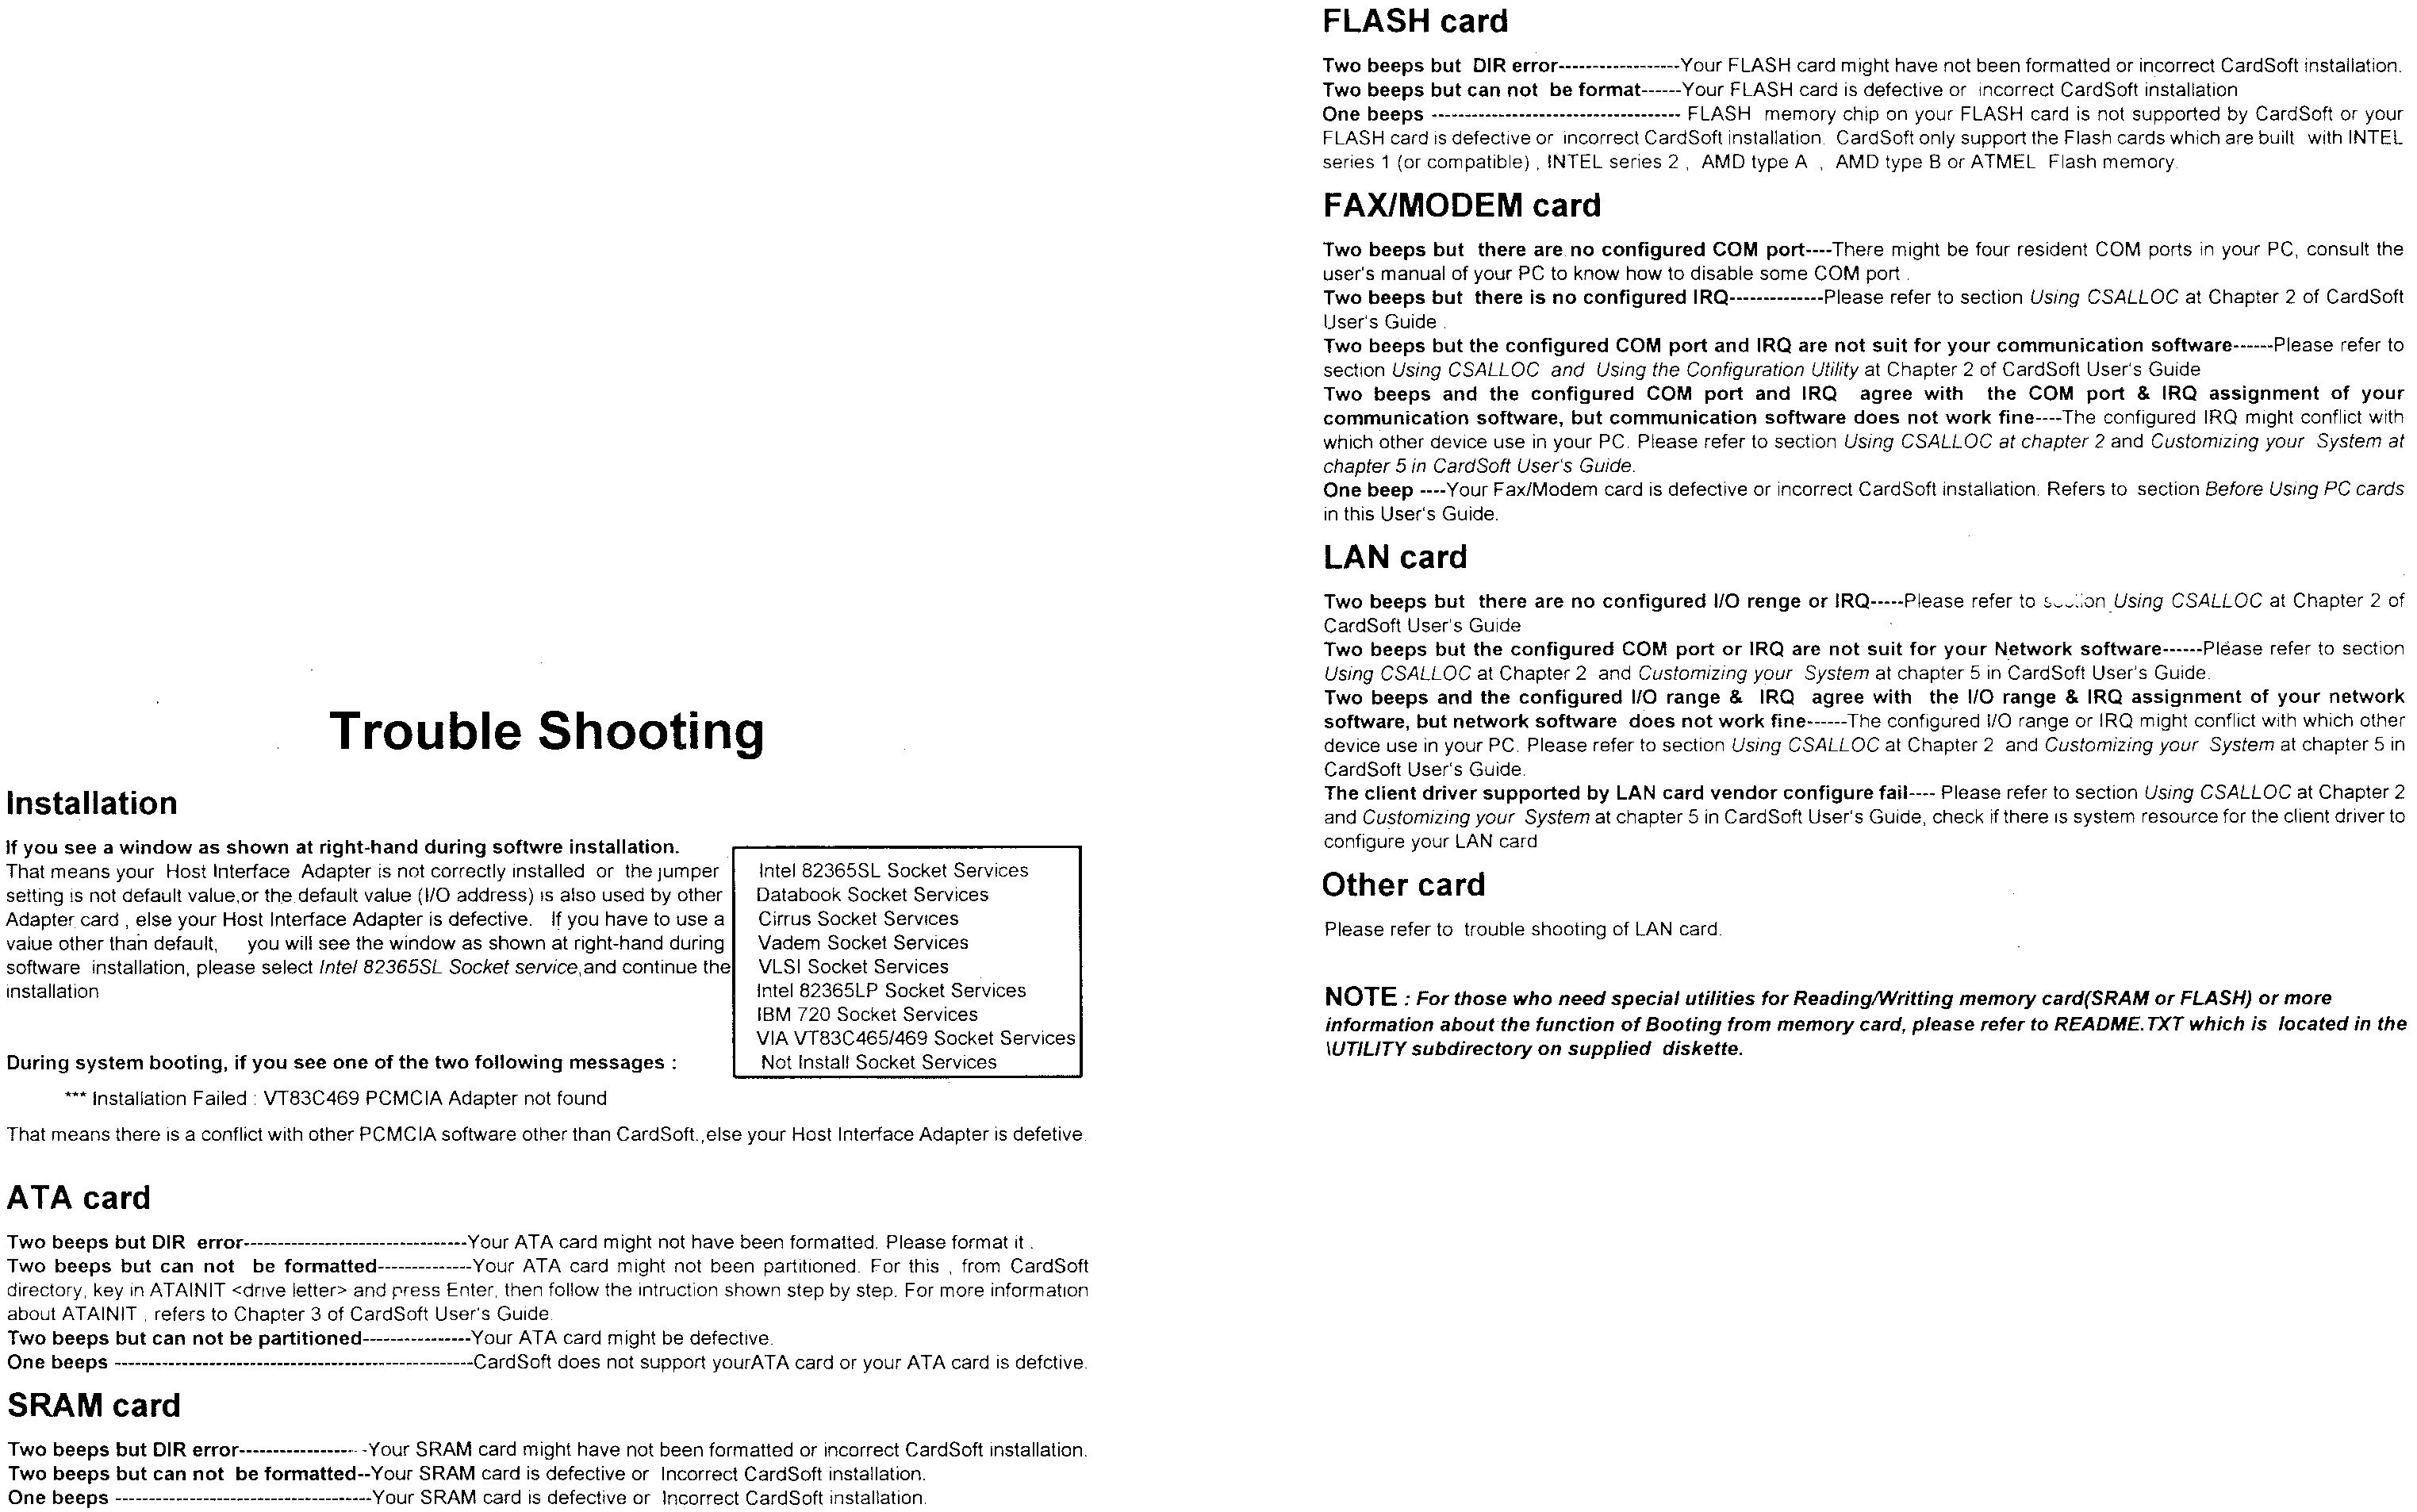 here's a sheet with some cryptic troubleshooting information